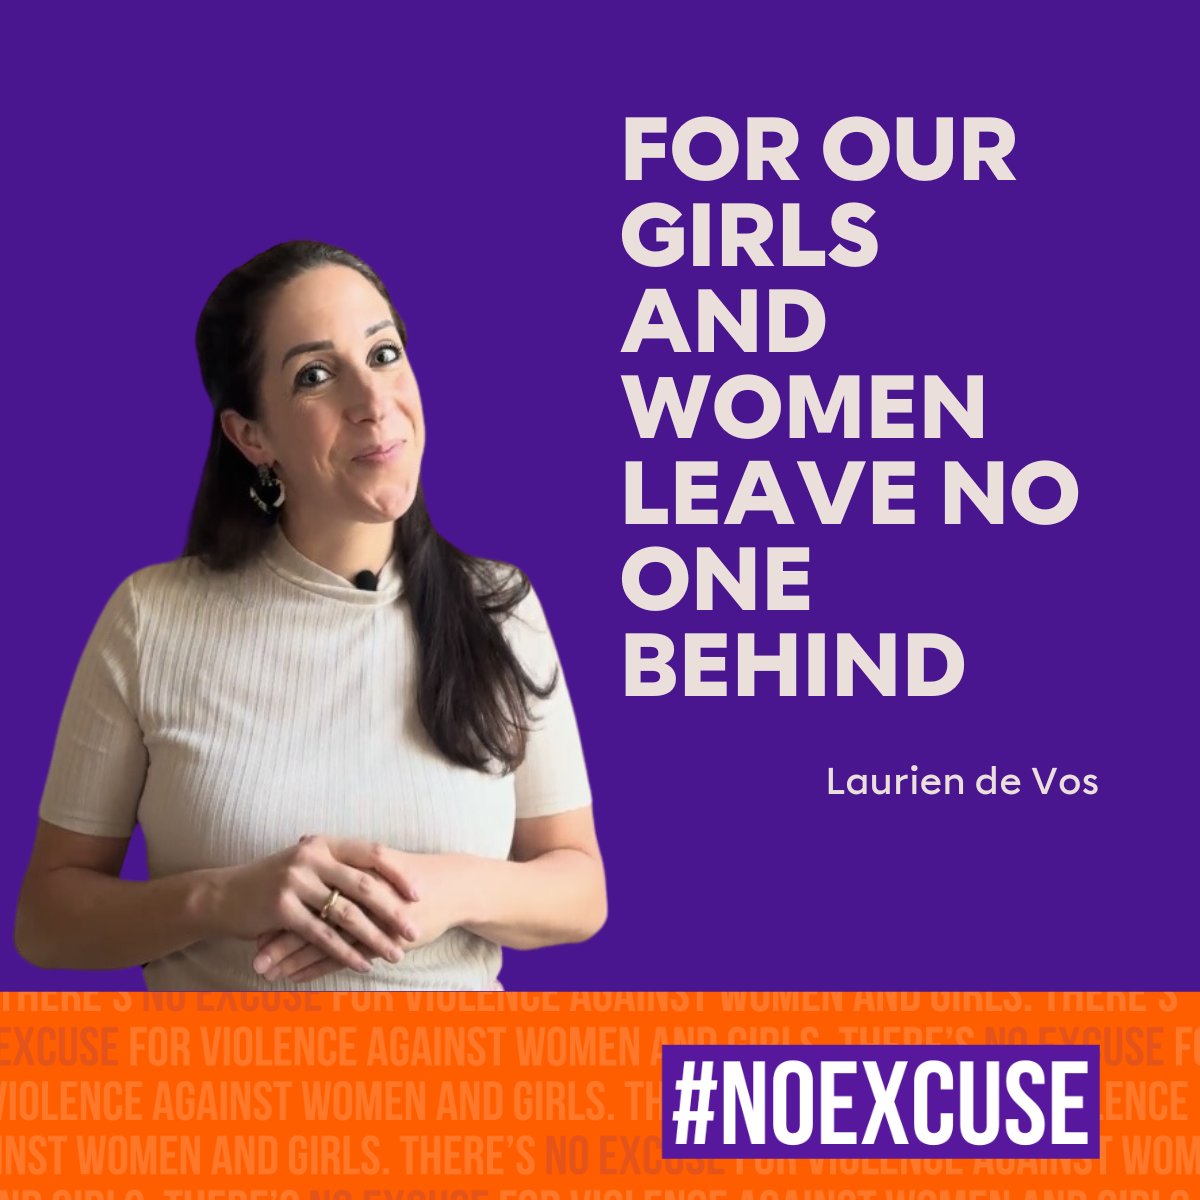 We proudly stand united during the #16DaysAgainstGBV, we recognize that #ViolenceAgainstWomen comes in many forms; 🚫Excluding her from decision-making is violence 🚫Harassing her while fetching water is violence #noexuse. Join @Right2Grow, let's change the narrative together!